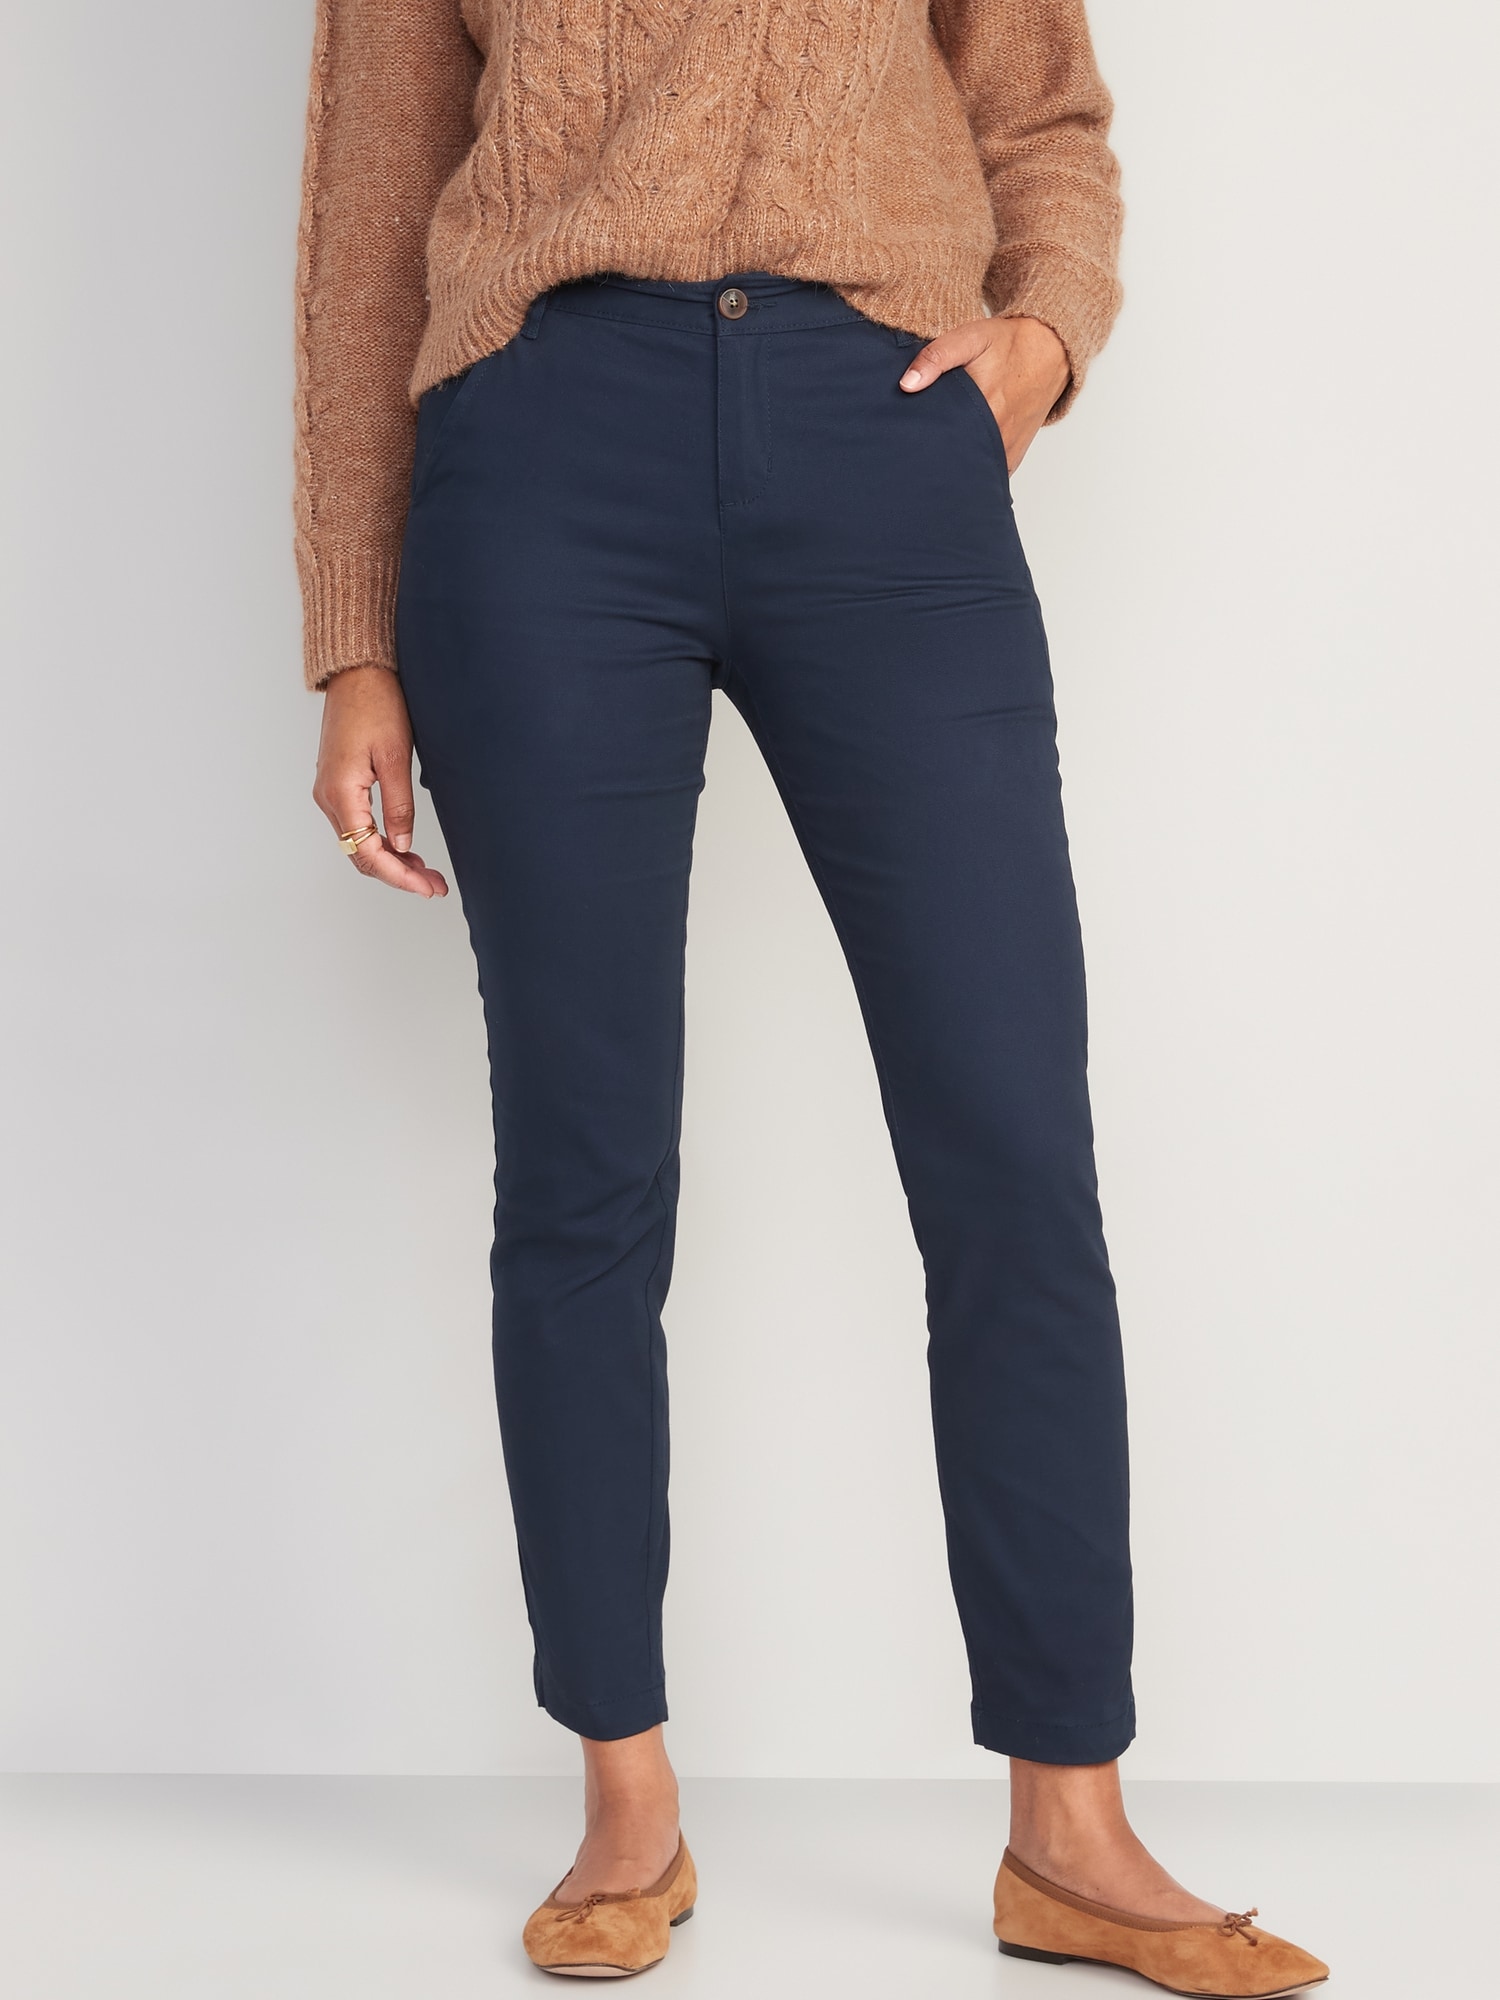 High-Waisted Wow Skinny Pants Hot Deal